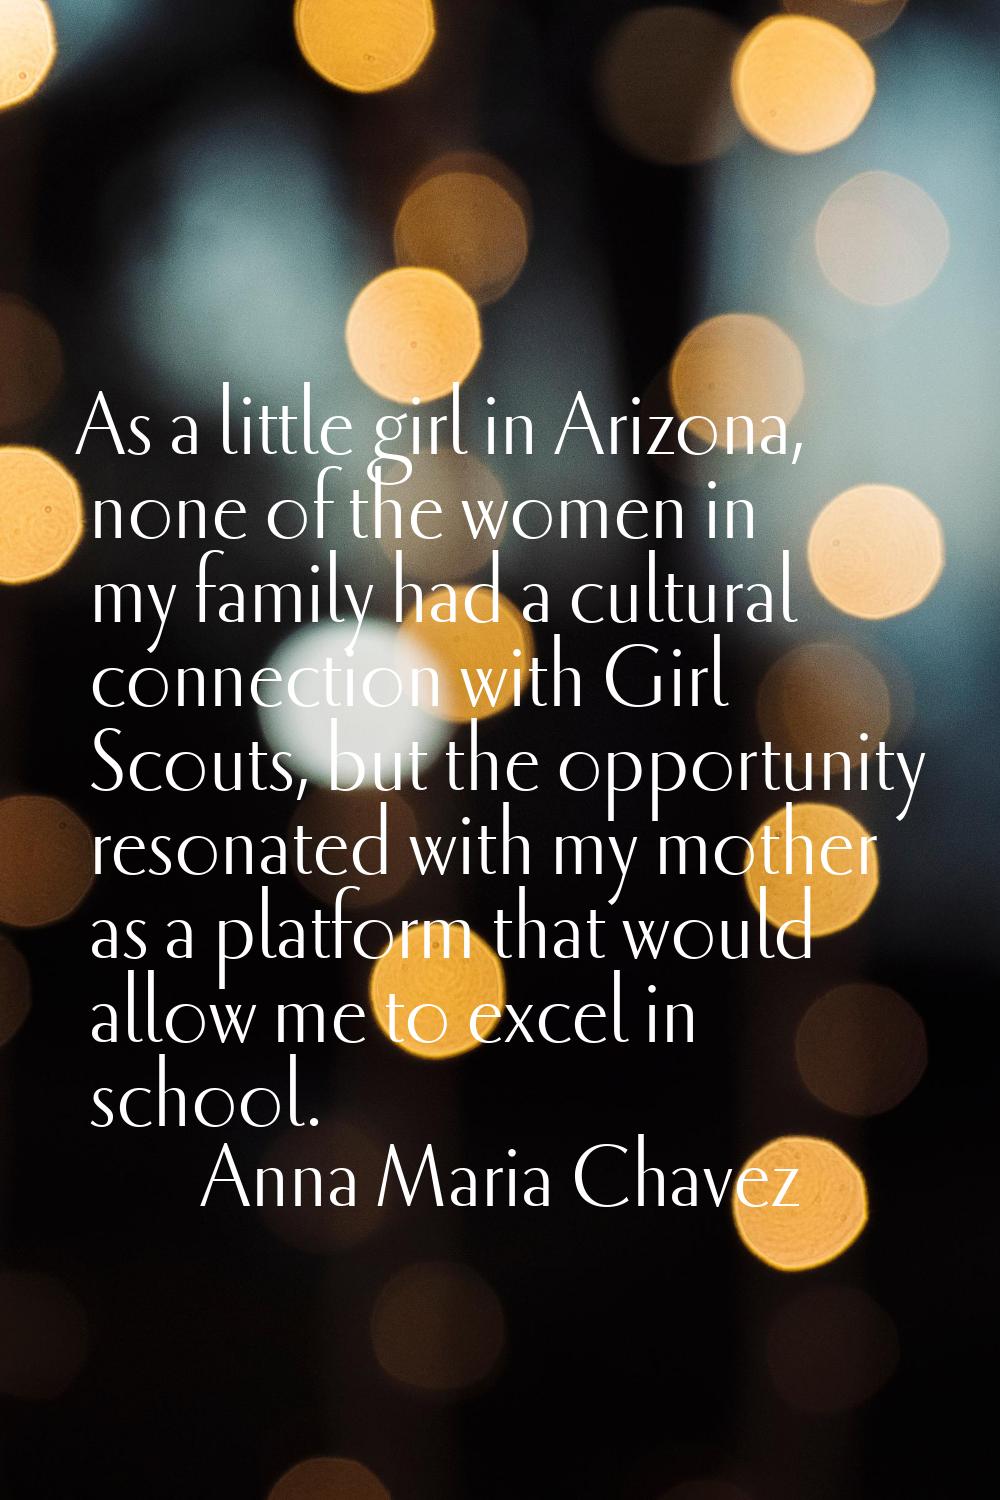 As a little girl in Arizona, none of the women in my family had a cultural connection with Girl Sco